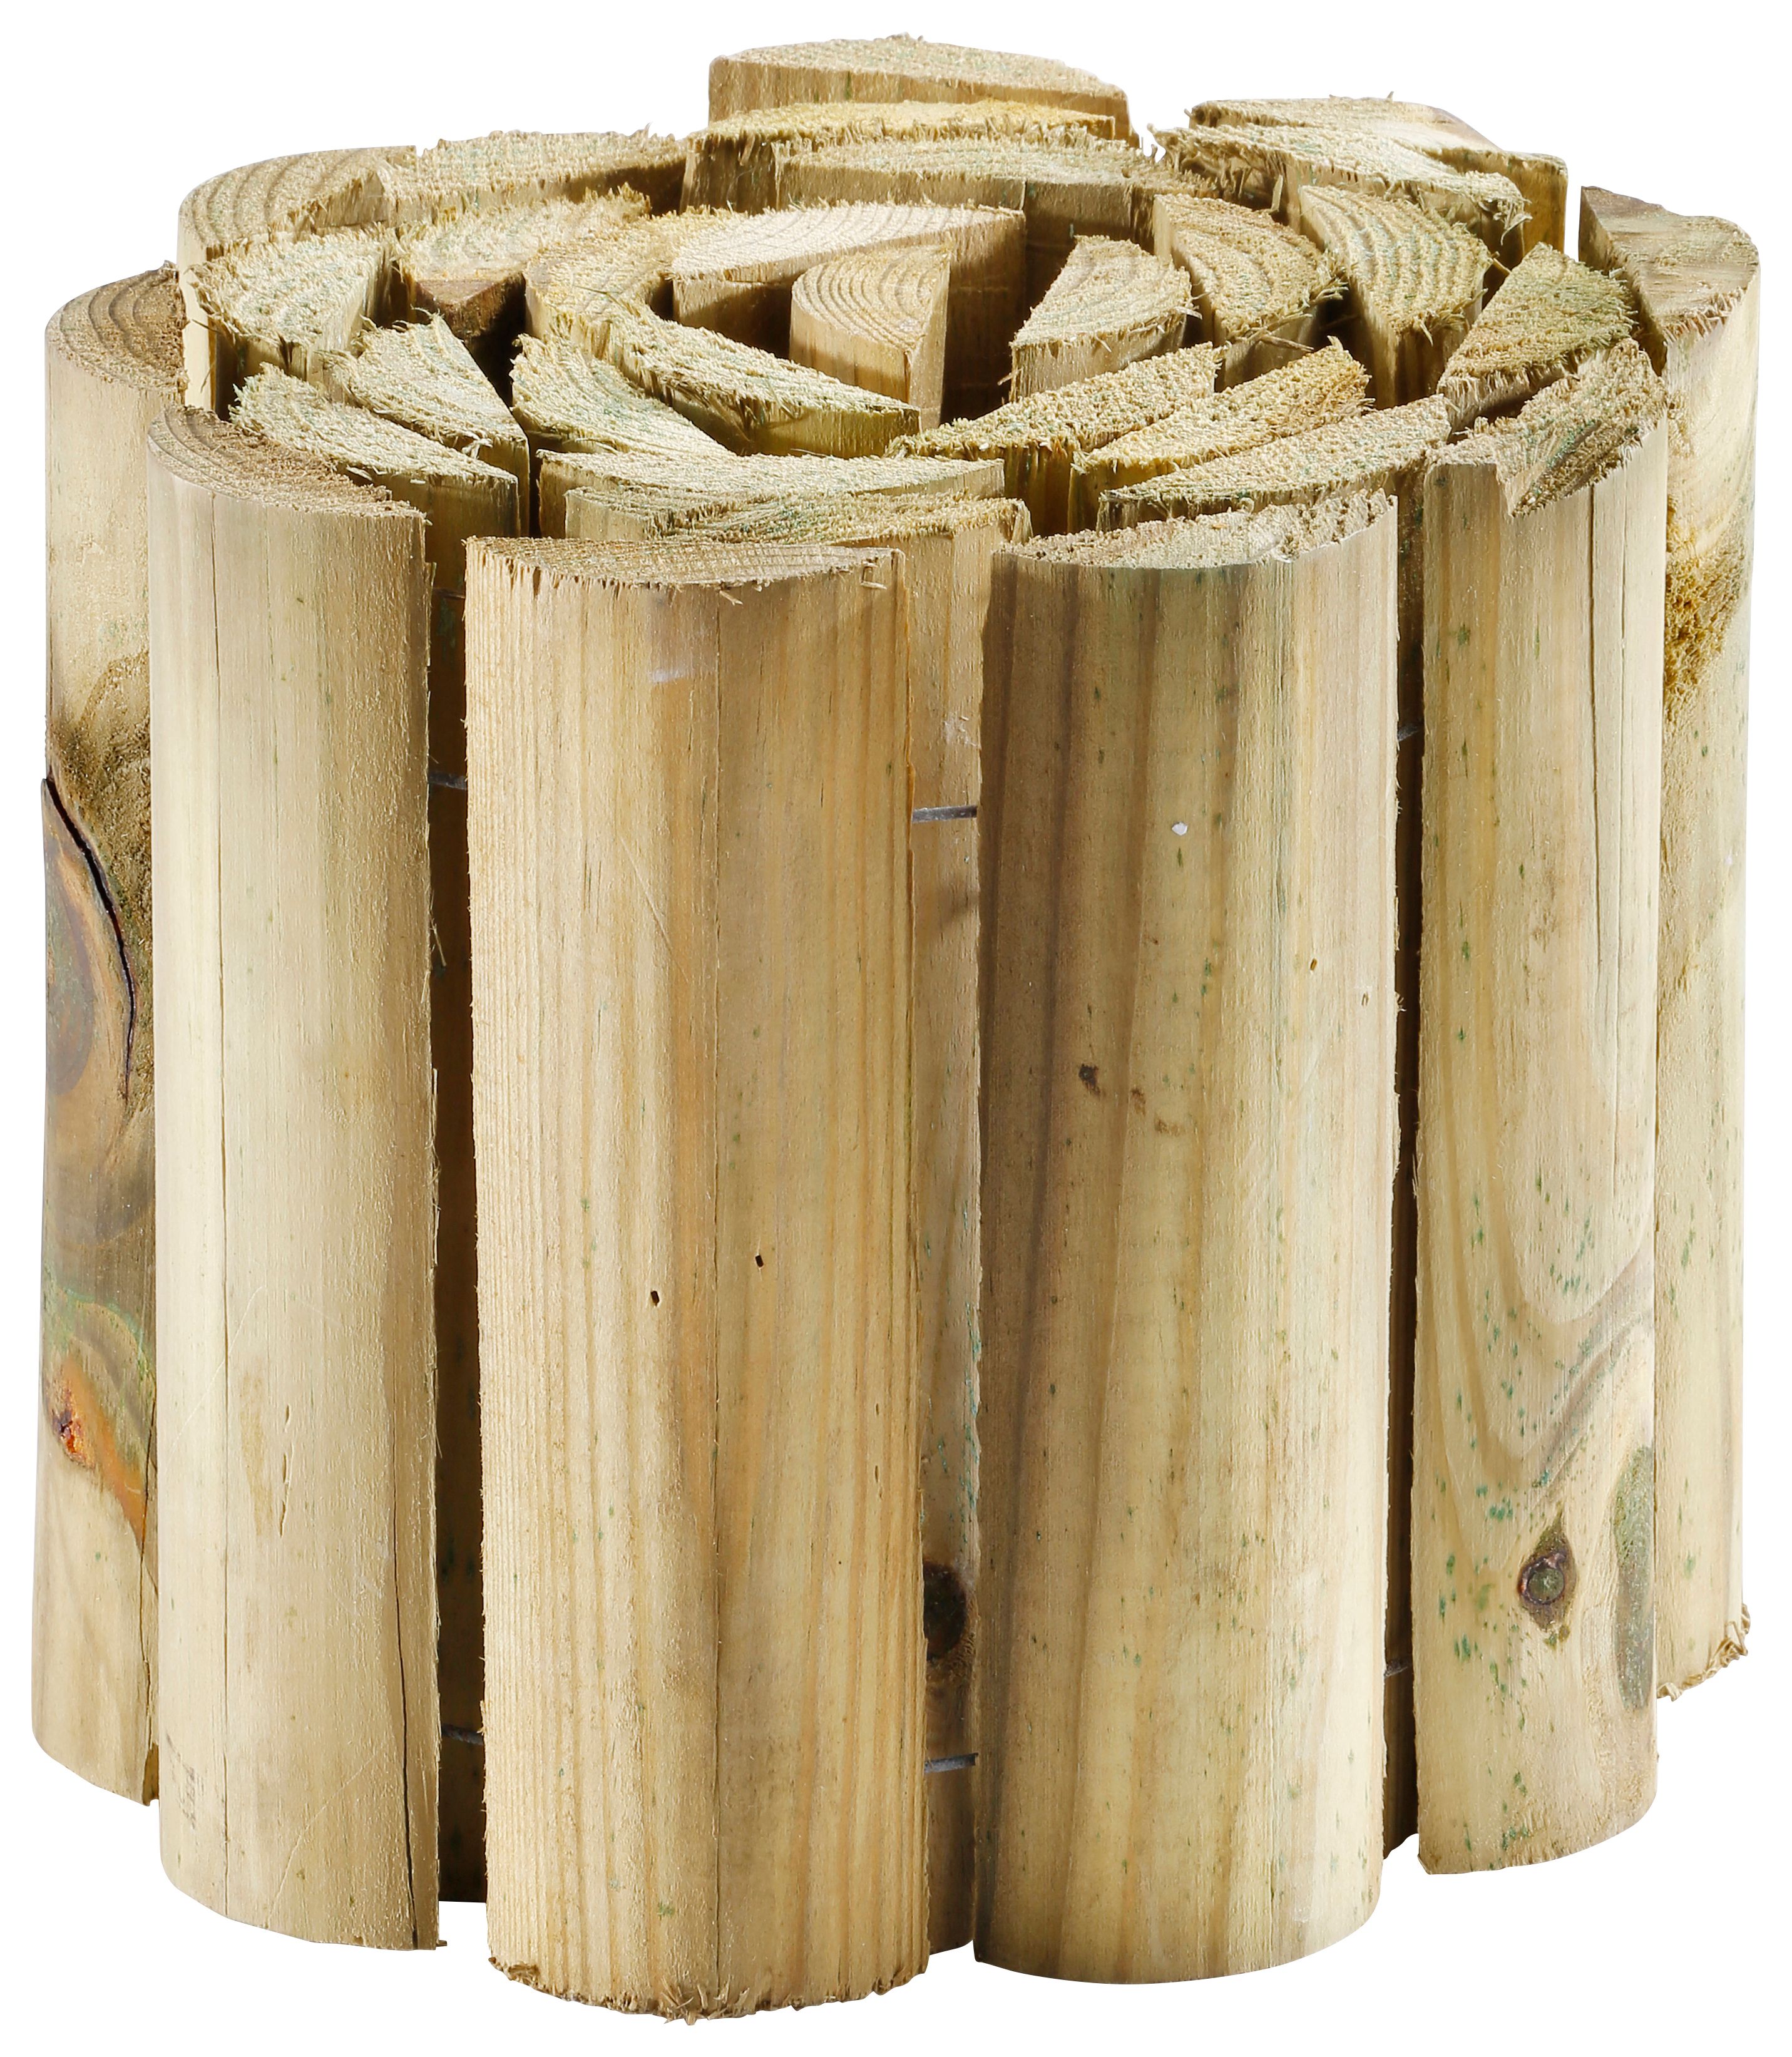 Image of Wickes Timber Border Log Edging Roll - 150 X 1500mm